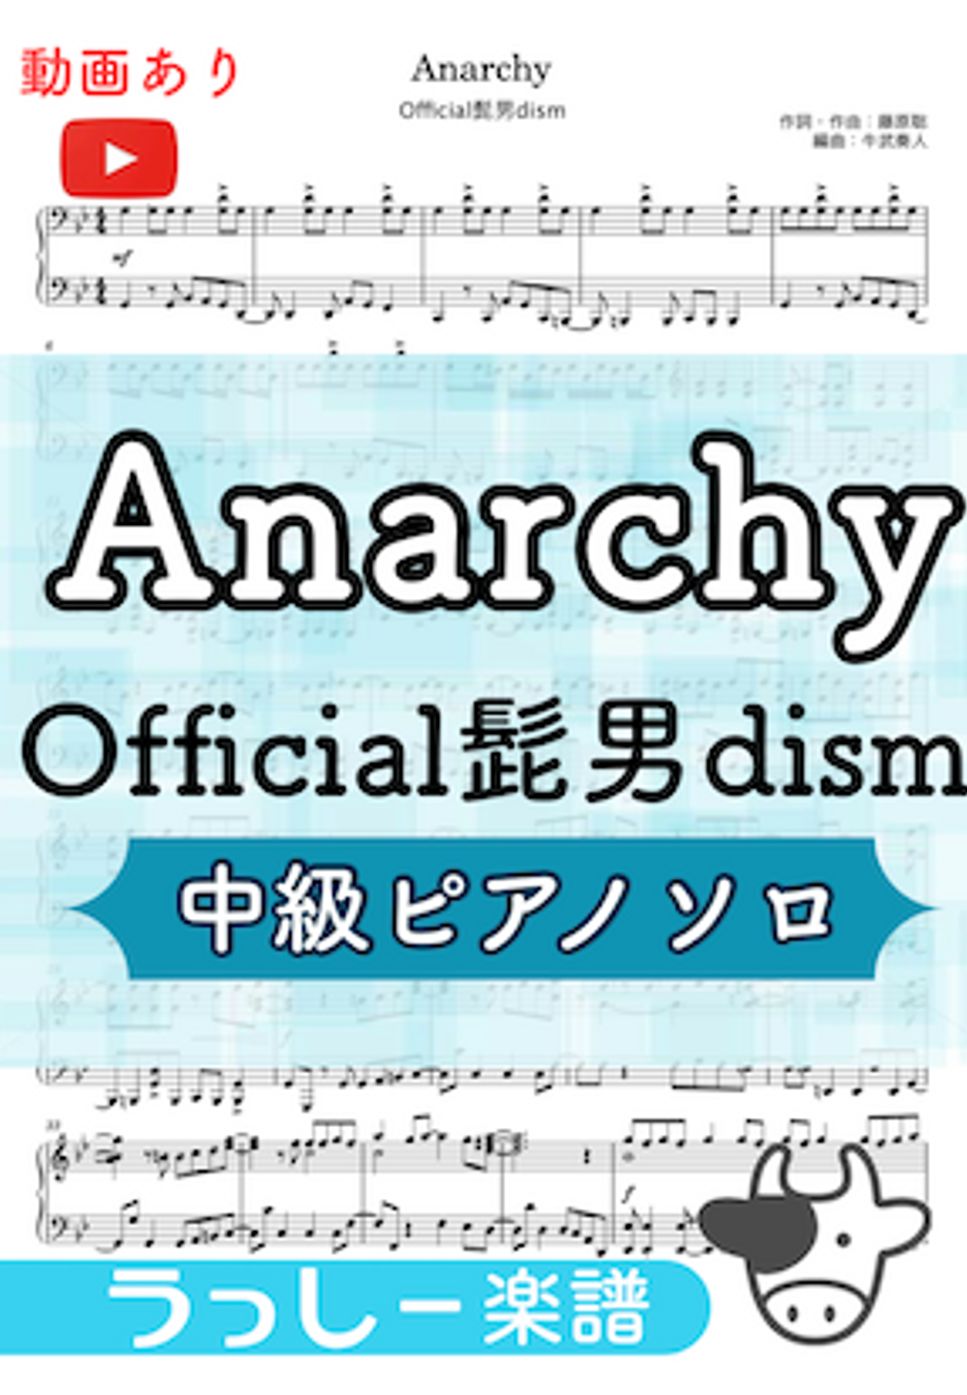 Official髭男dism - Anarchy (中級ピアノソロ) by 牛武奏人